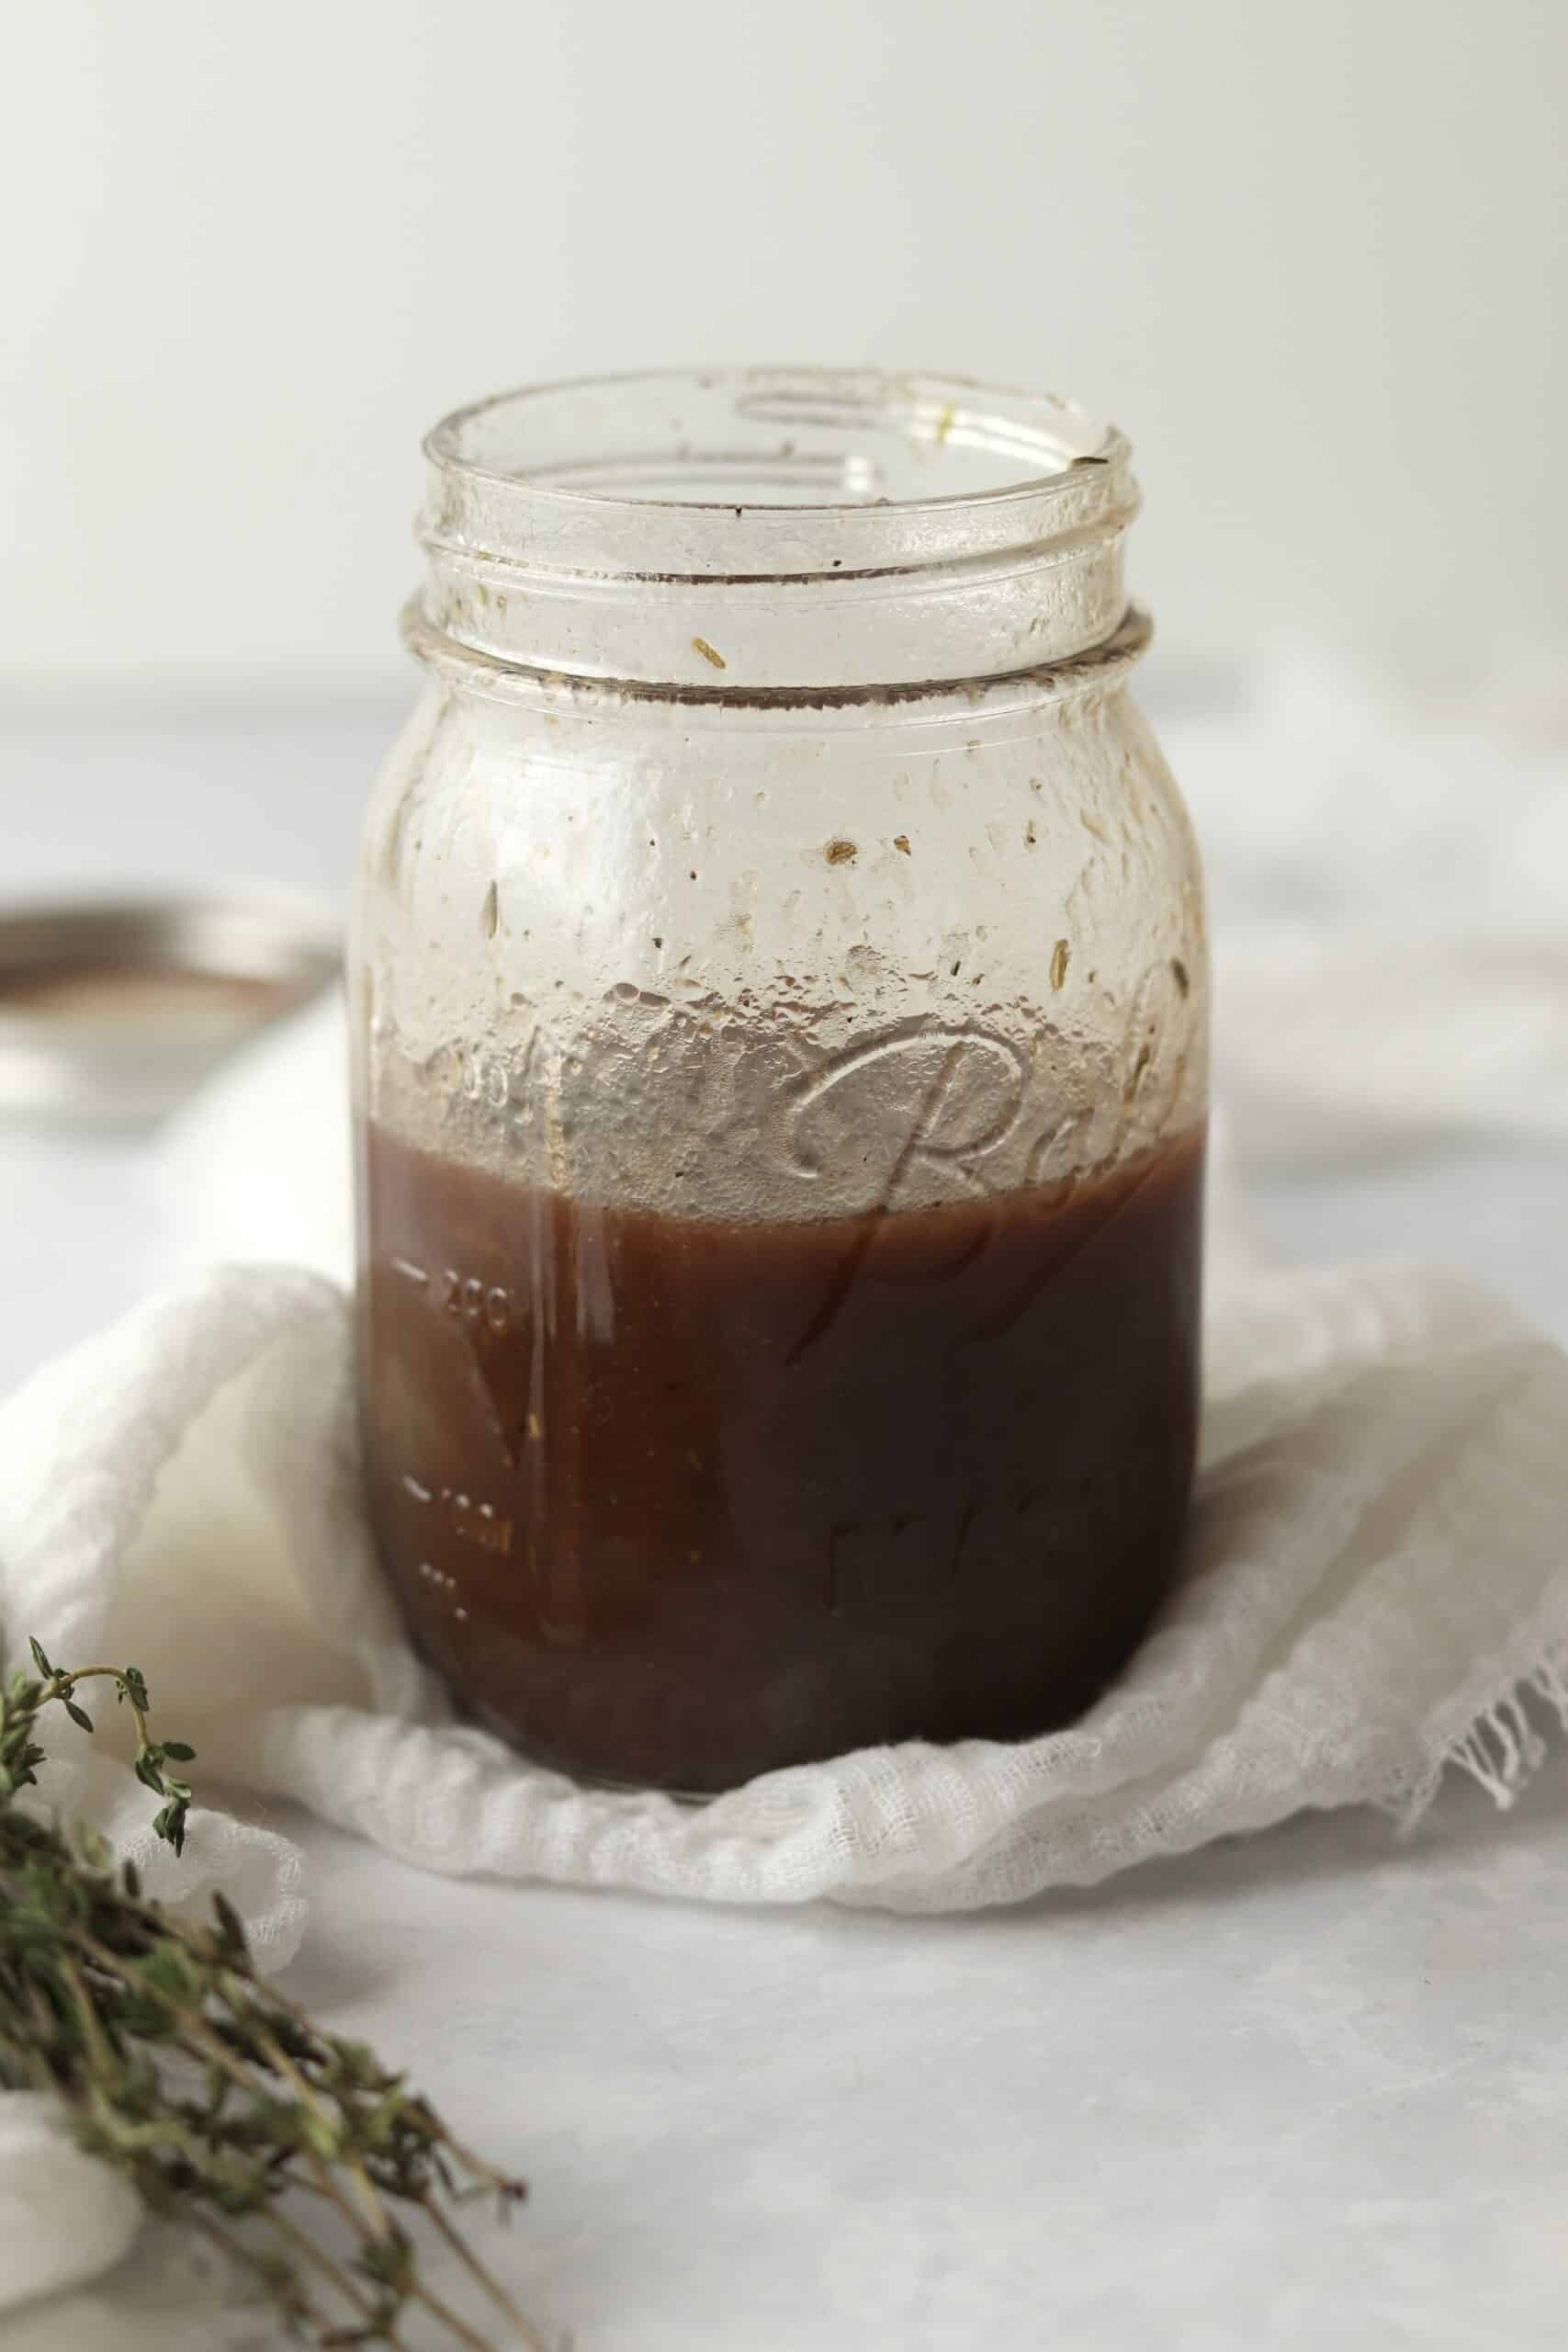 maple balsamic salad dressing with rosemary and thyme.